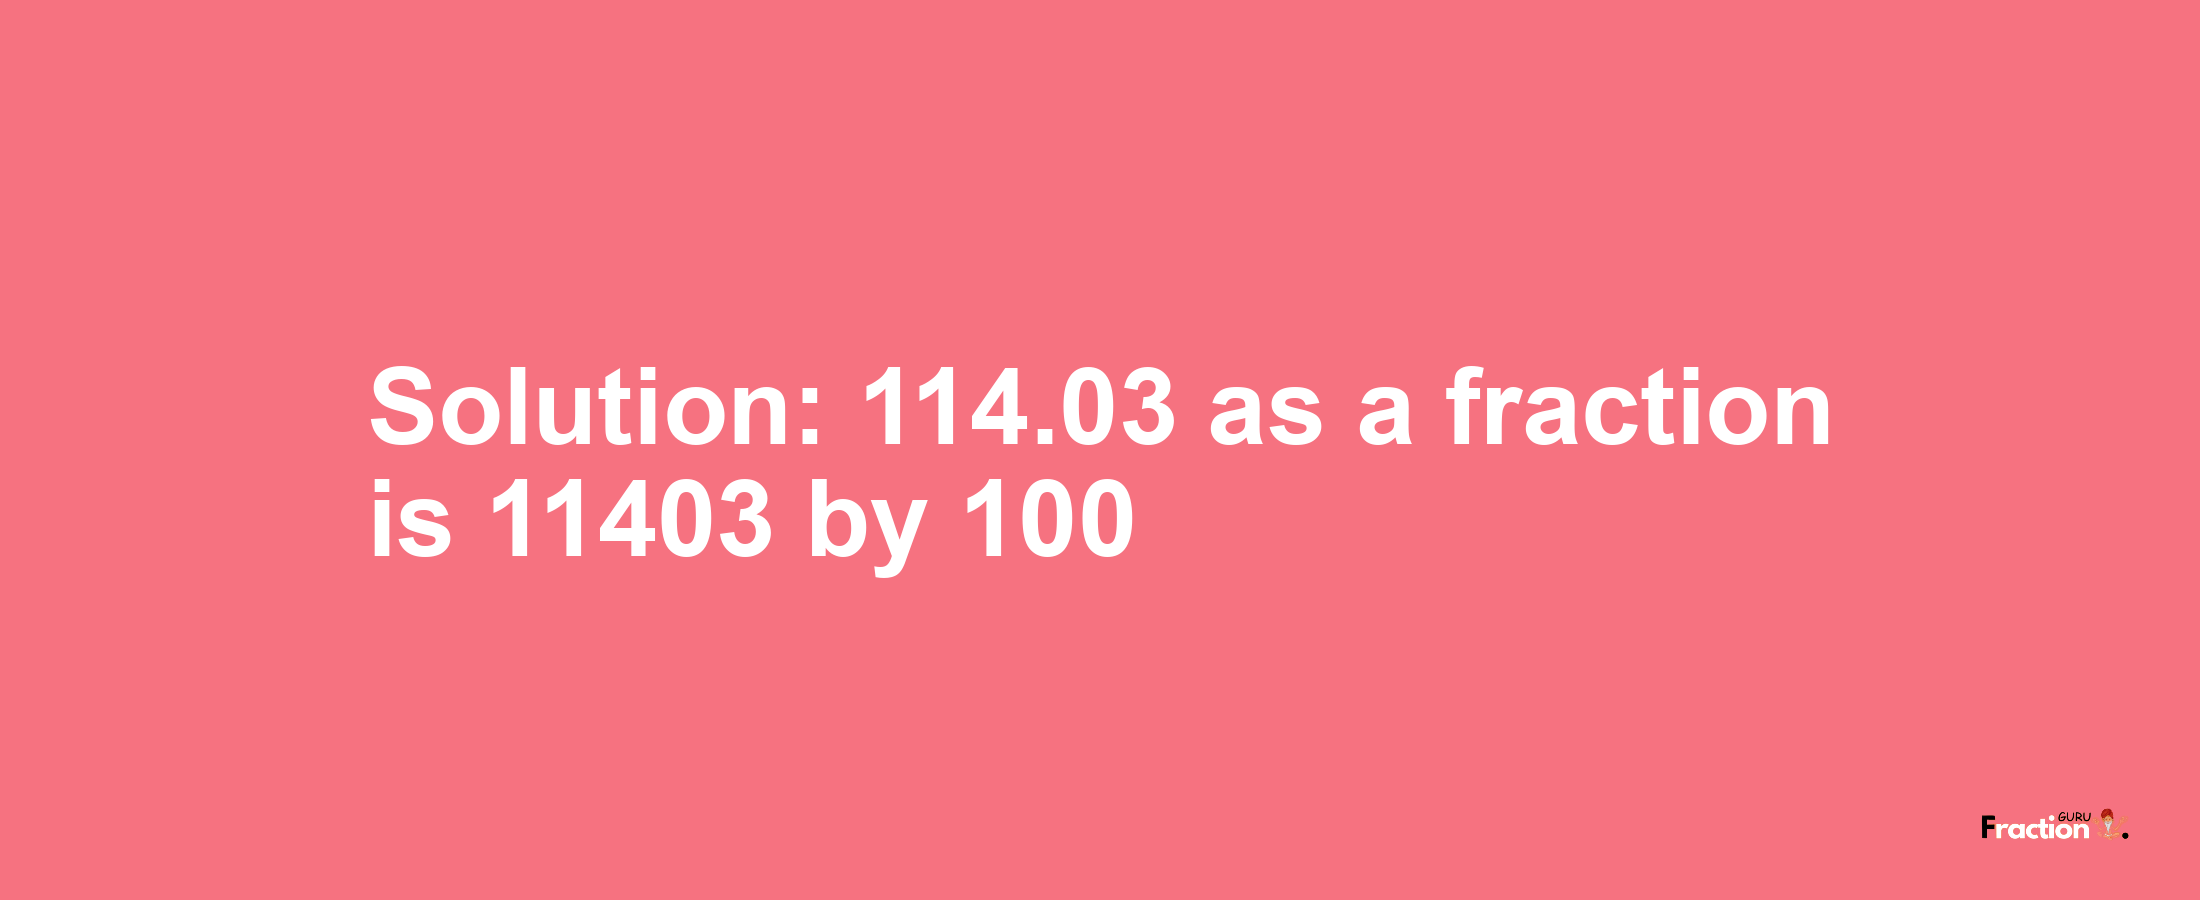 Solution:114.03 as a fraction is 11403/100